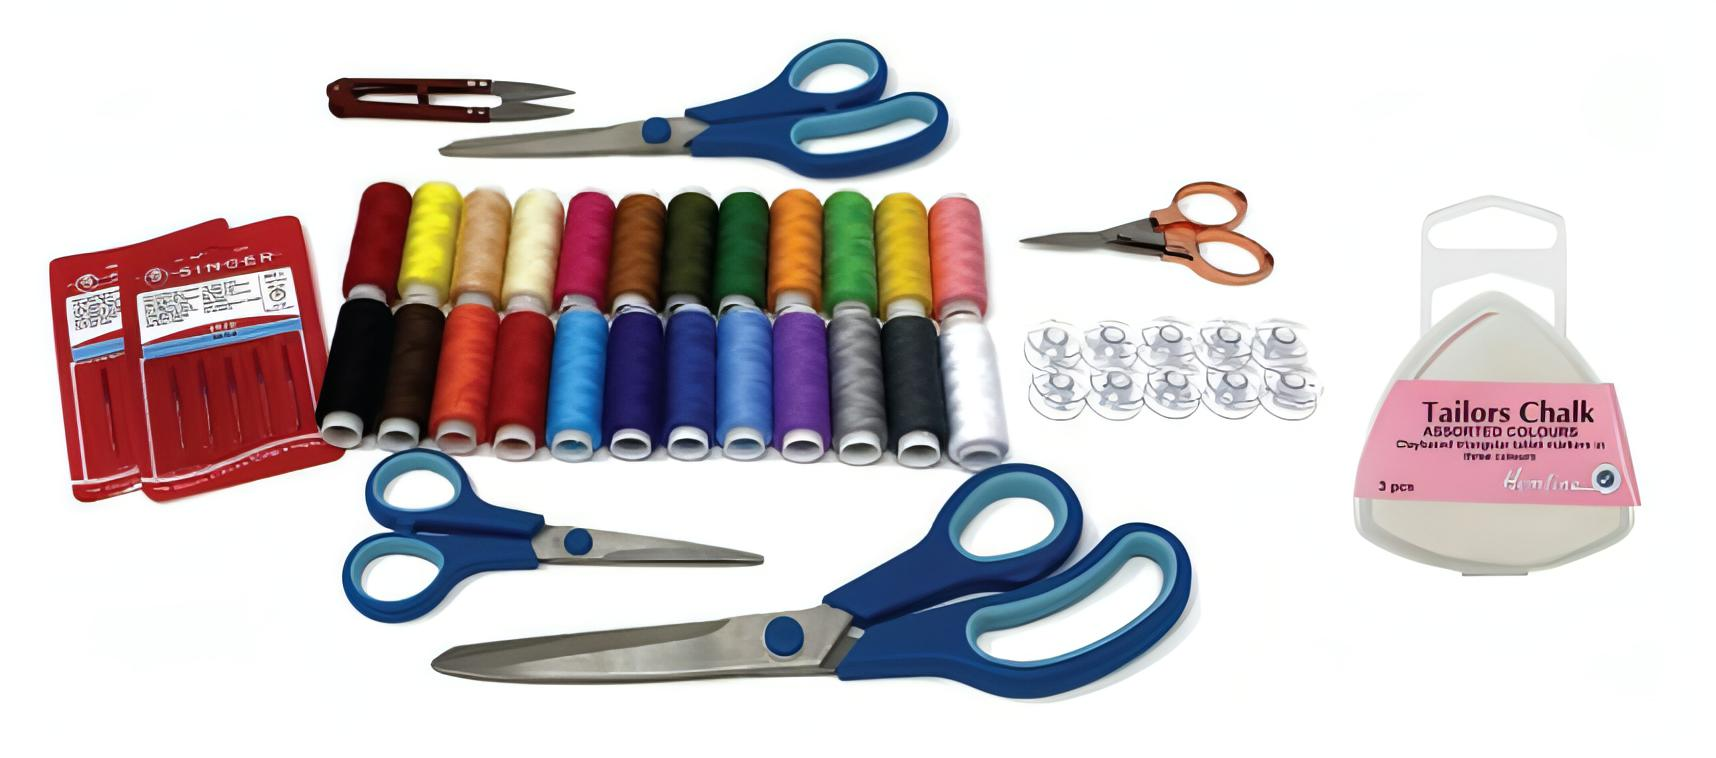 Sewing Bee Ultimate Bundle with 50+ pieces - Thread Set, Scissor set, Needle Pack, Bobbin Pack, Rose gold scissors, Thread cutter, Tailors chalk set